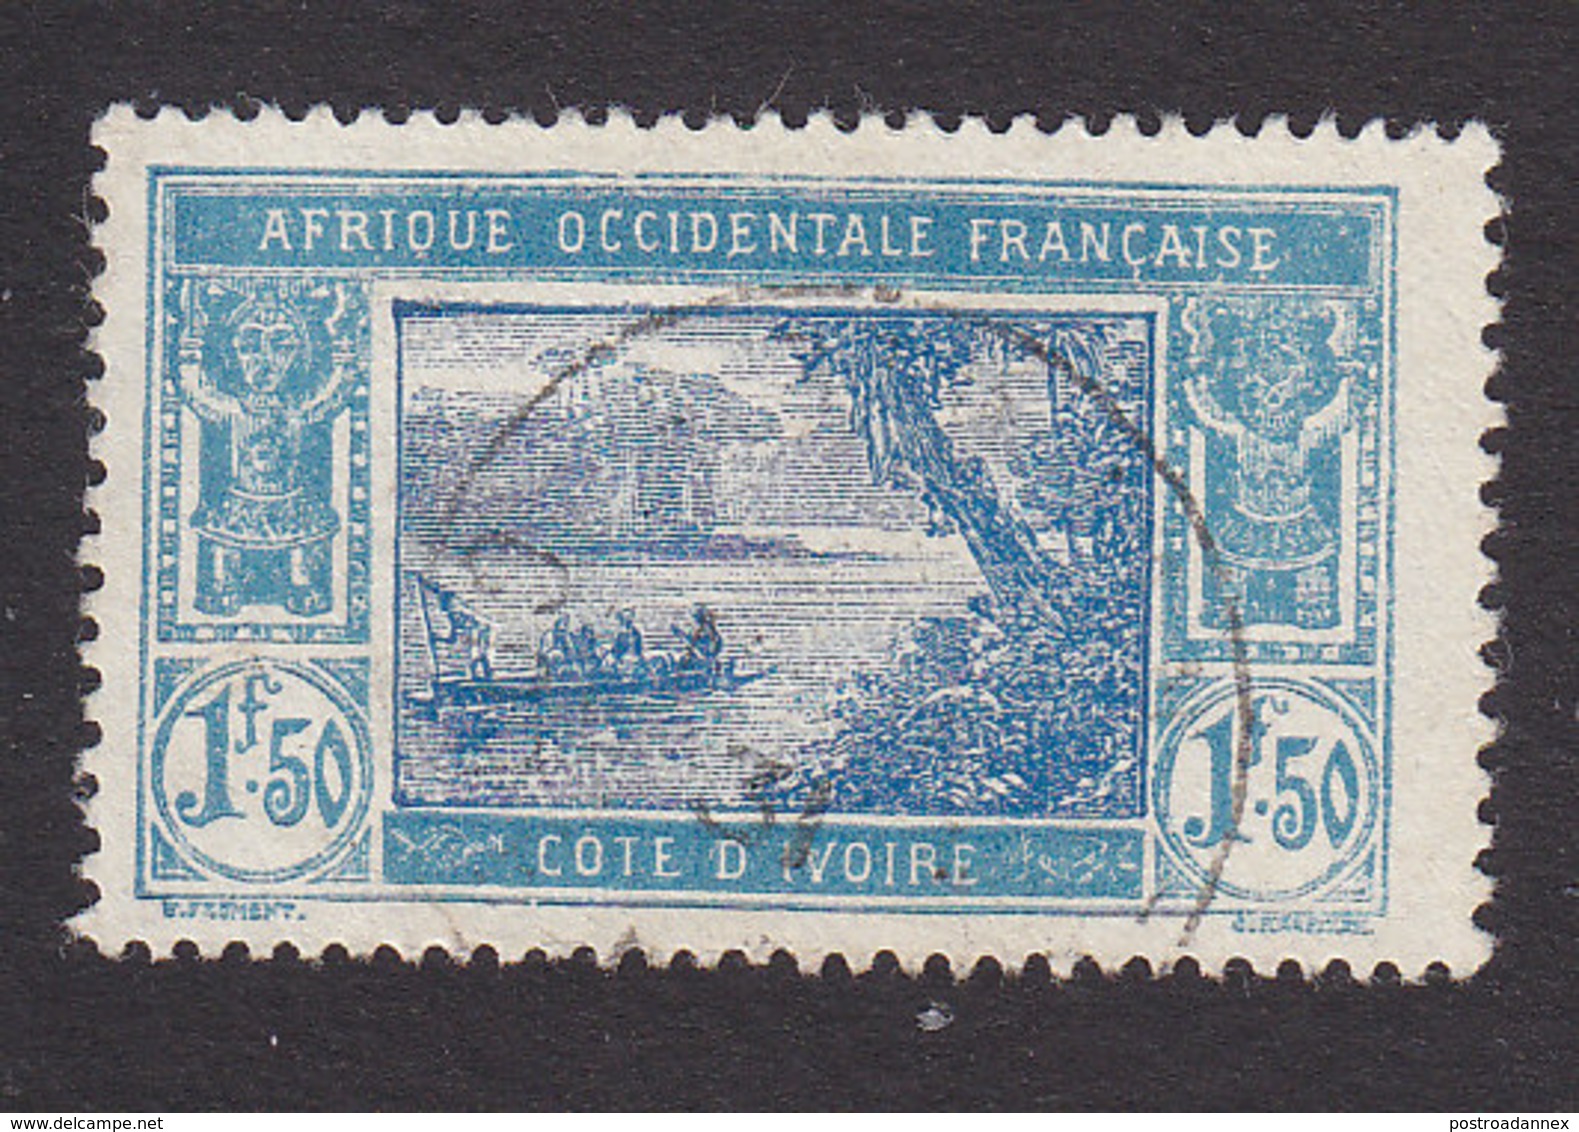 Ivory Coast, Scott #73, Used, River Scene, Issued 1913 - Used Stamps